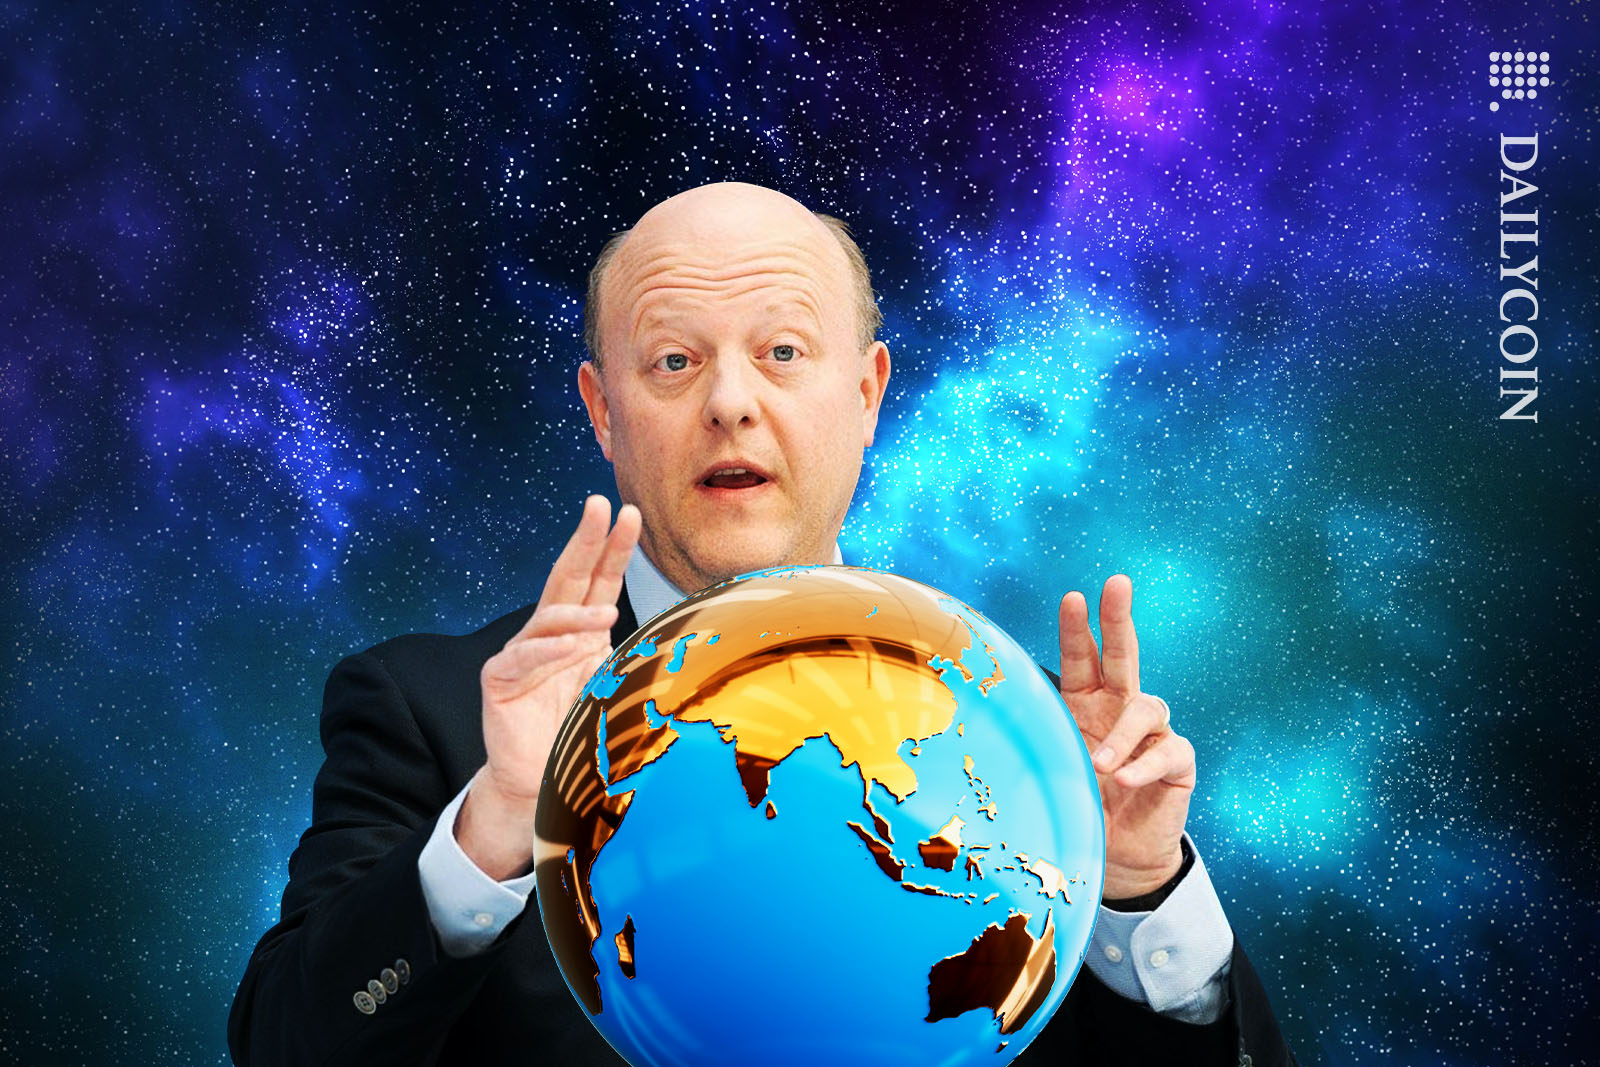 Jeremy Allaire explaining adoption using a globe as an aid.